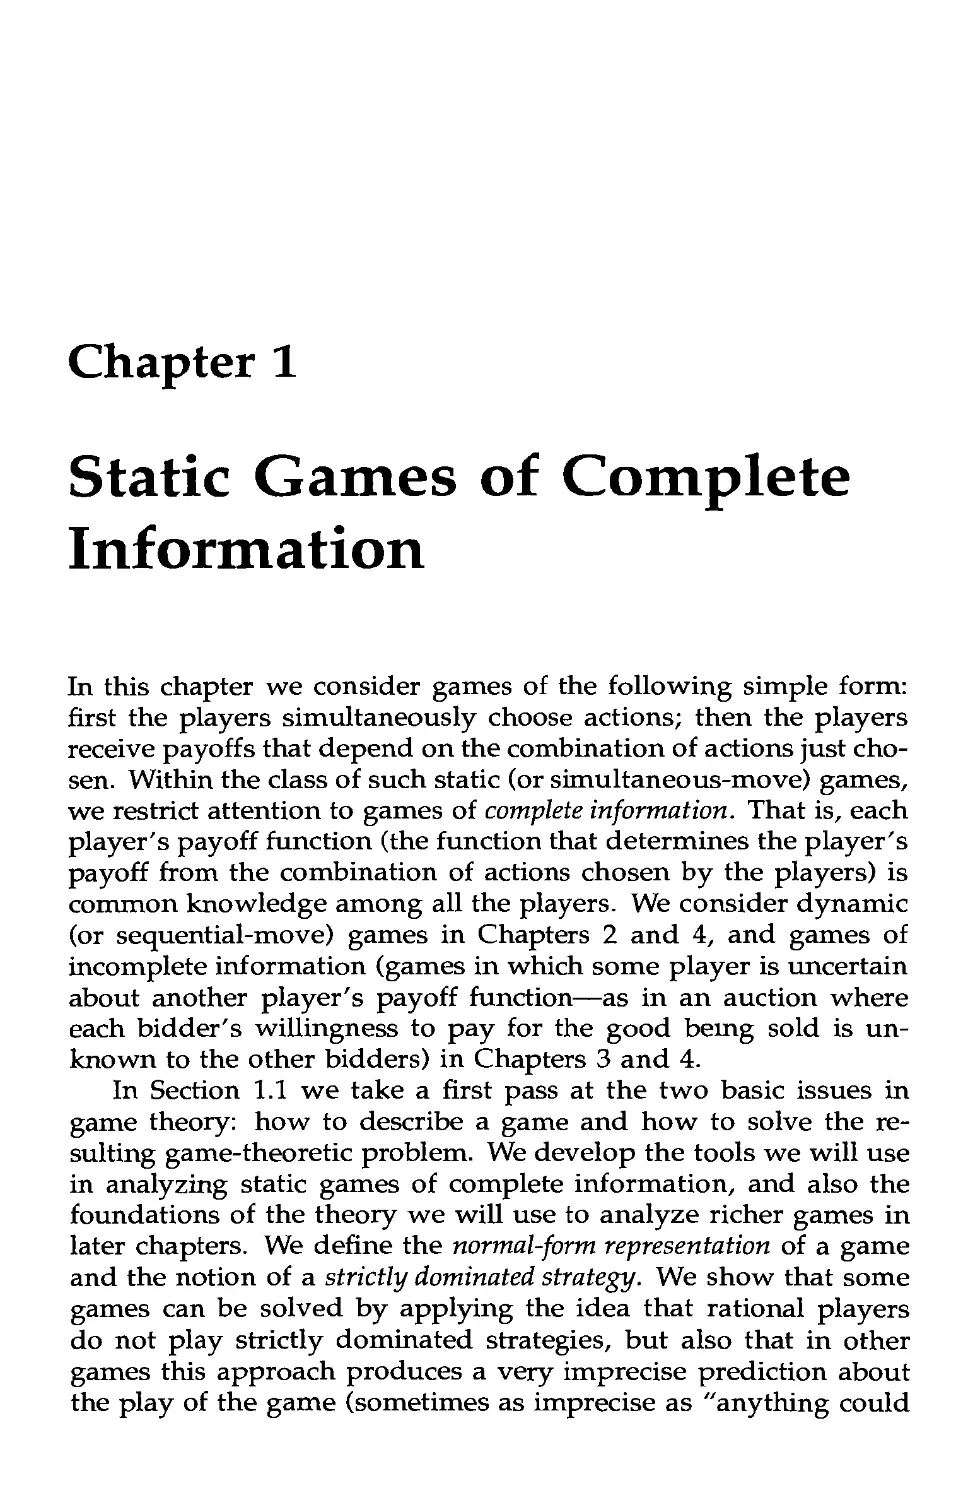 1 Static Games of Complete Information